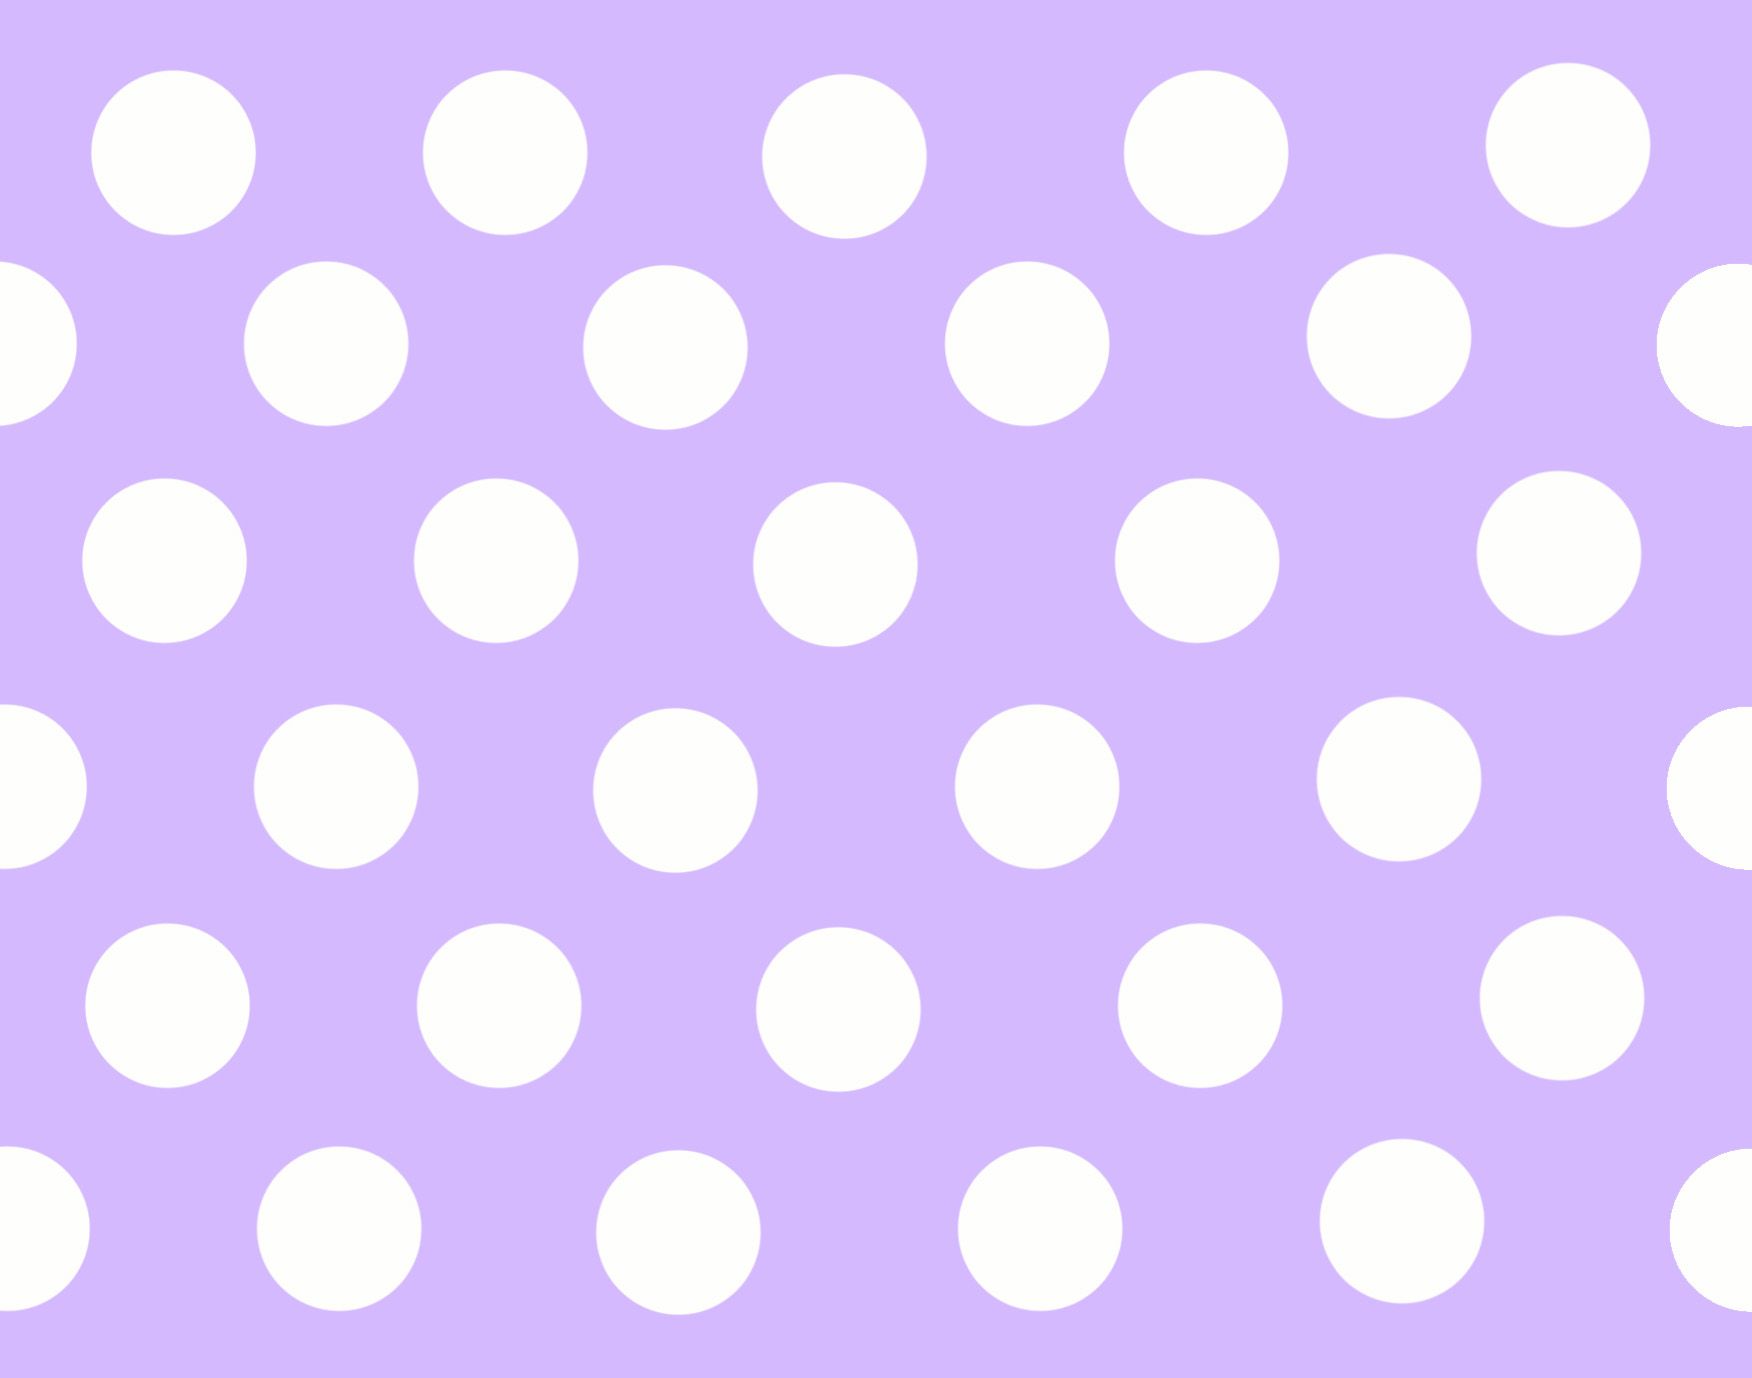 8. Polka Dot Purple, Pink, and White Nails - wide 5